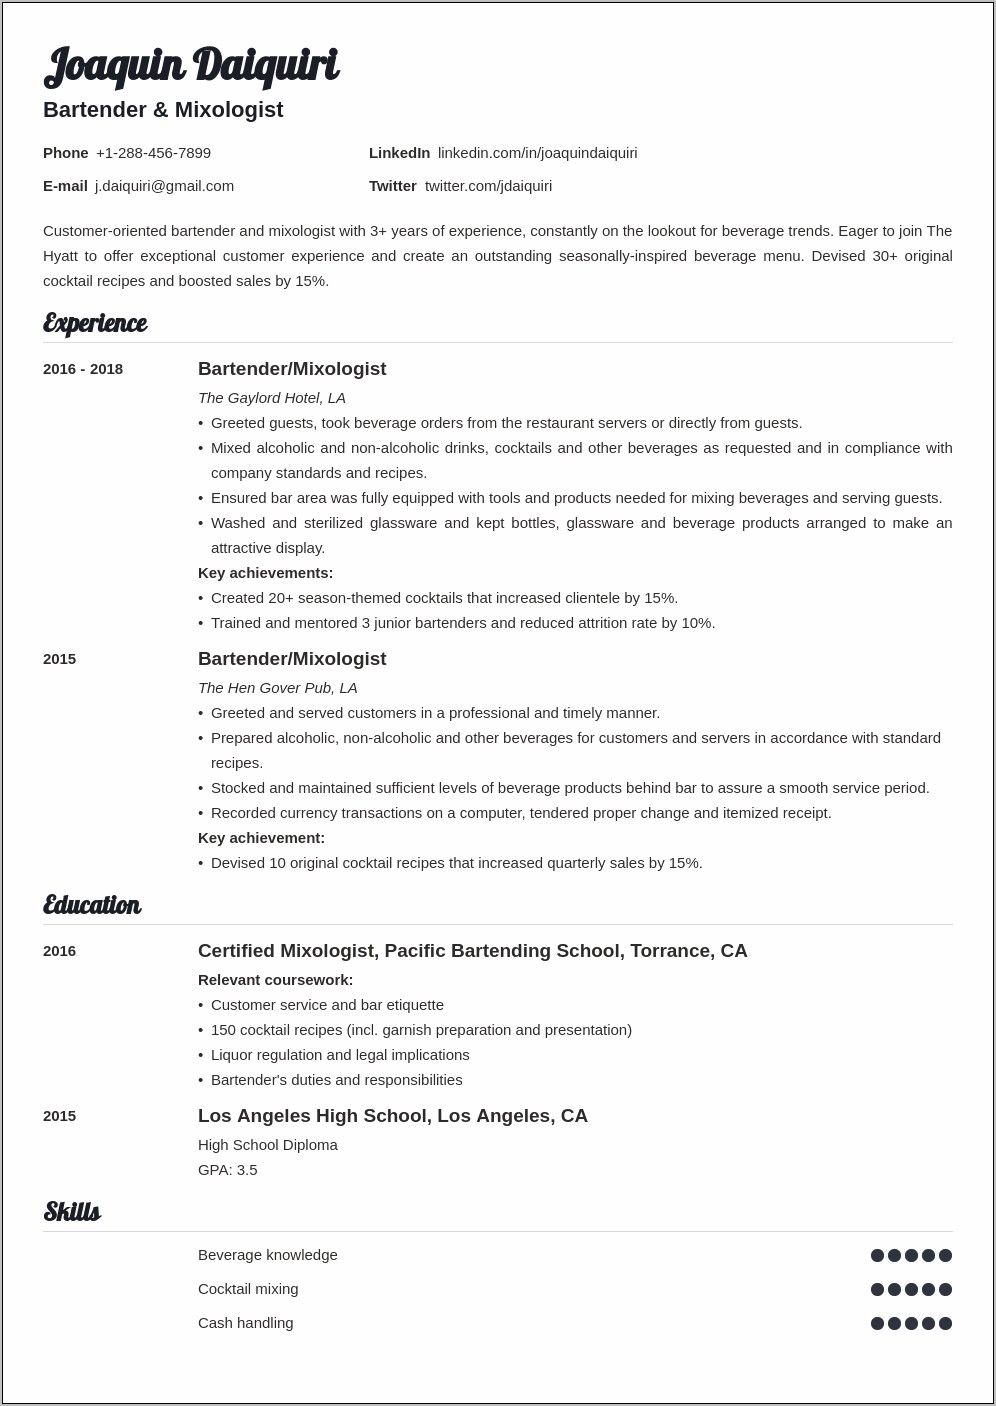 Best Bartender Resume You Can Copy And Paste